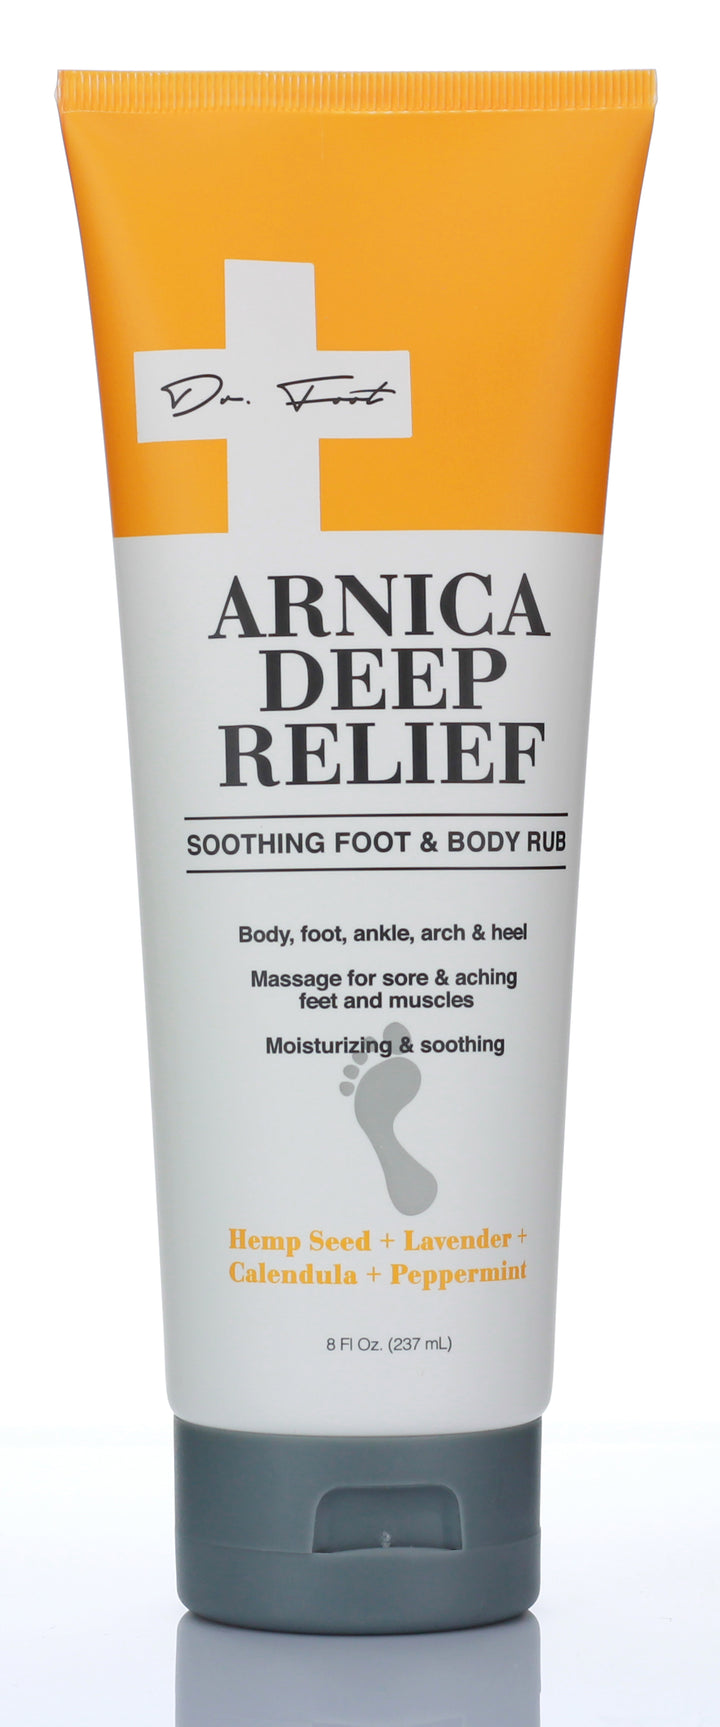 Dr. Foot Arnica Deep Relief Soothing Foot & Body Rub Cream 8 Fl Oz - Pure Valley 